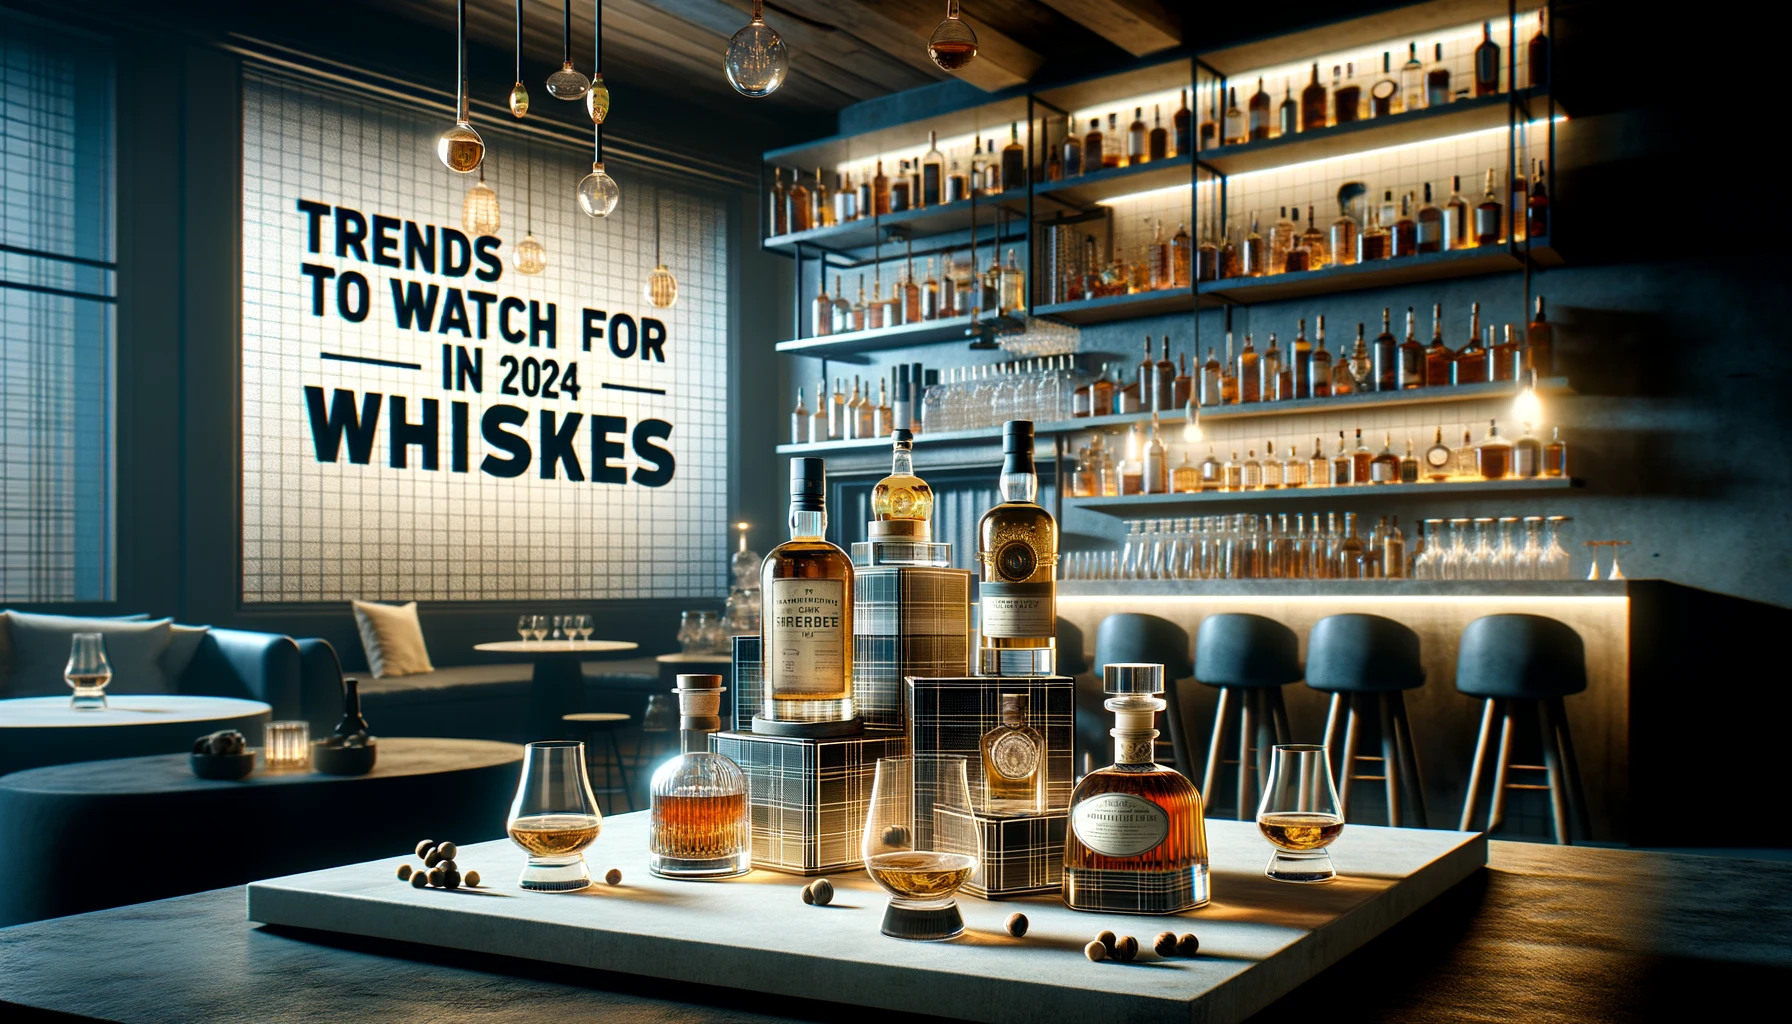 Trends to Watch for in 2024 Whiskies